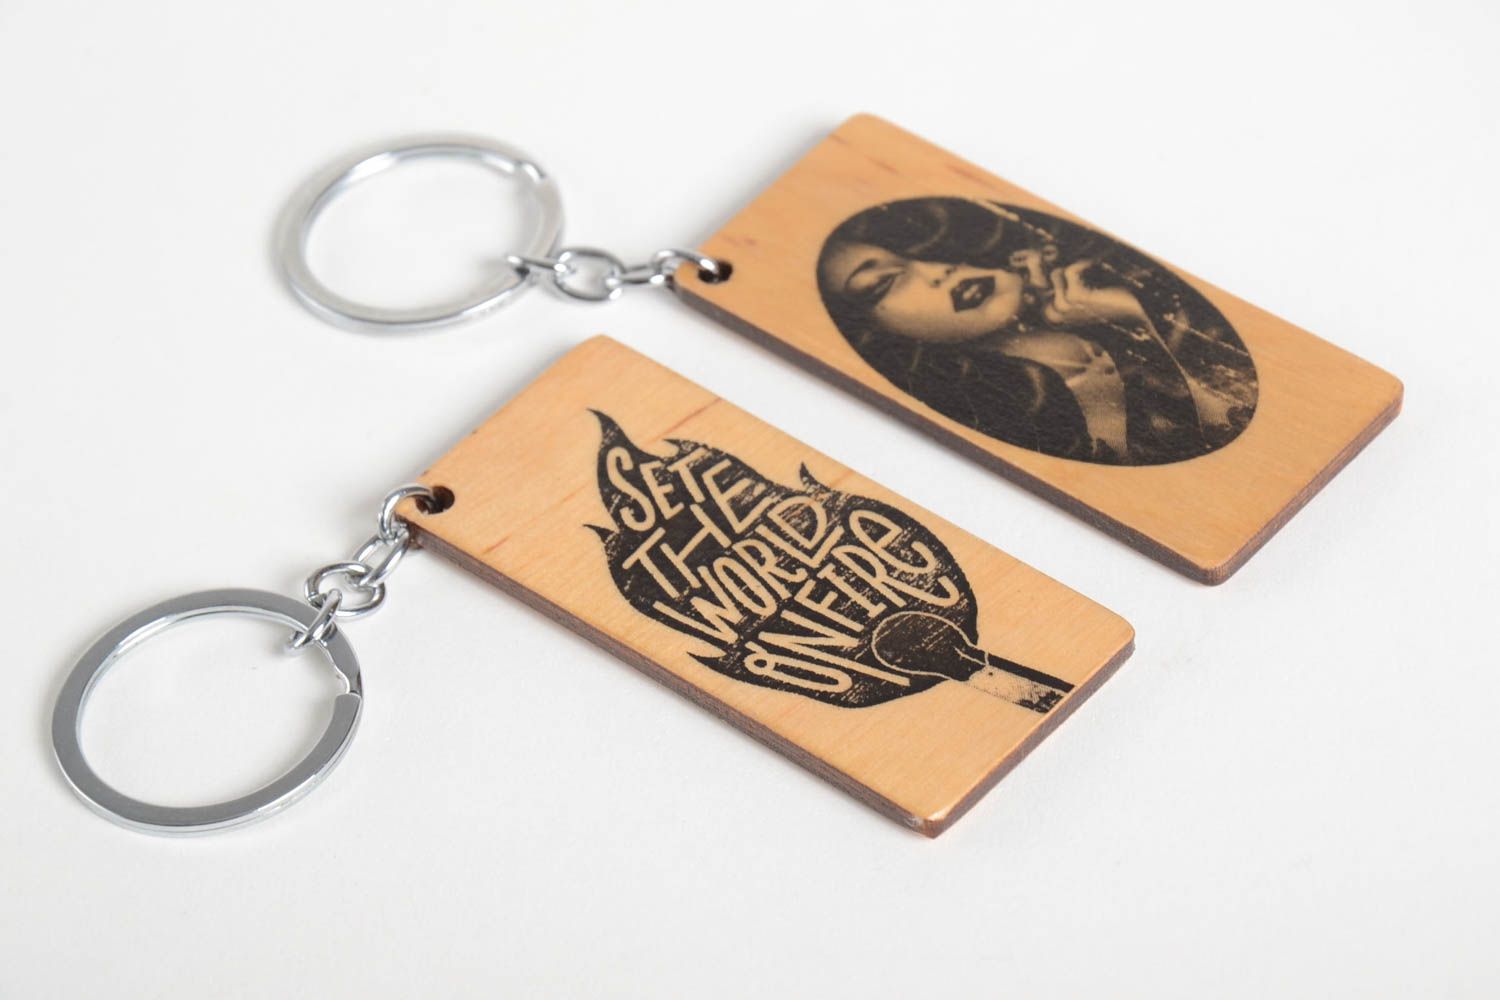 Handmade wooden keychains designer keyrings 2 key chains wooden gifts photo 5